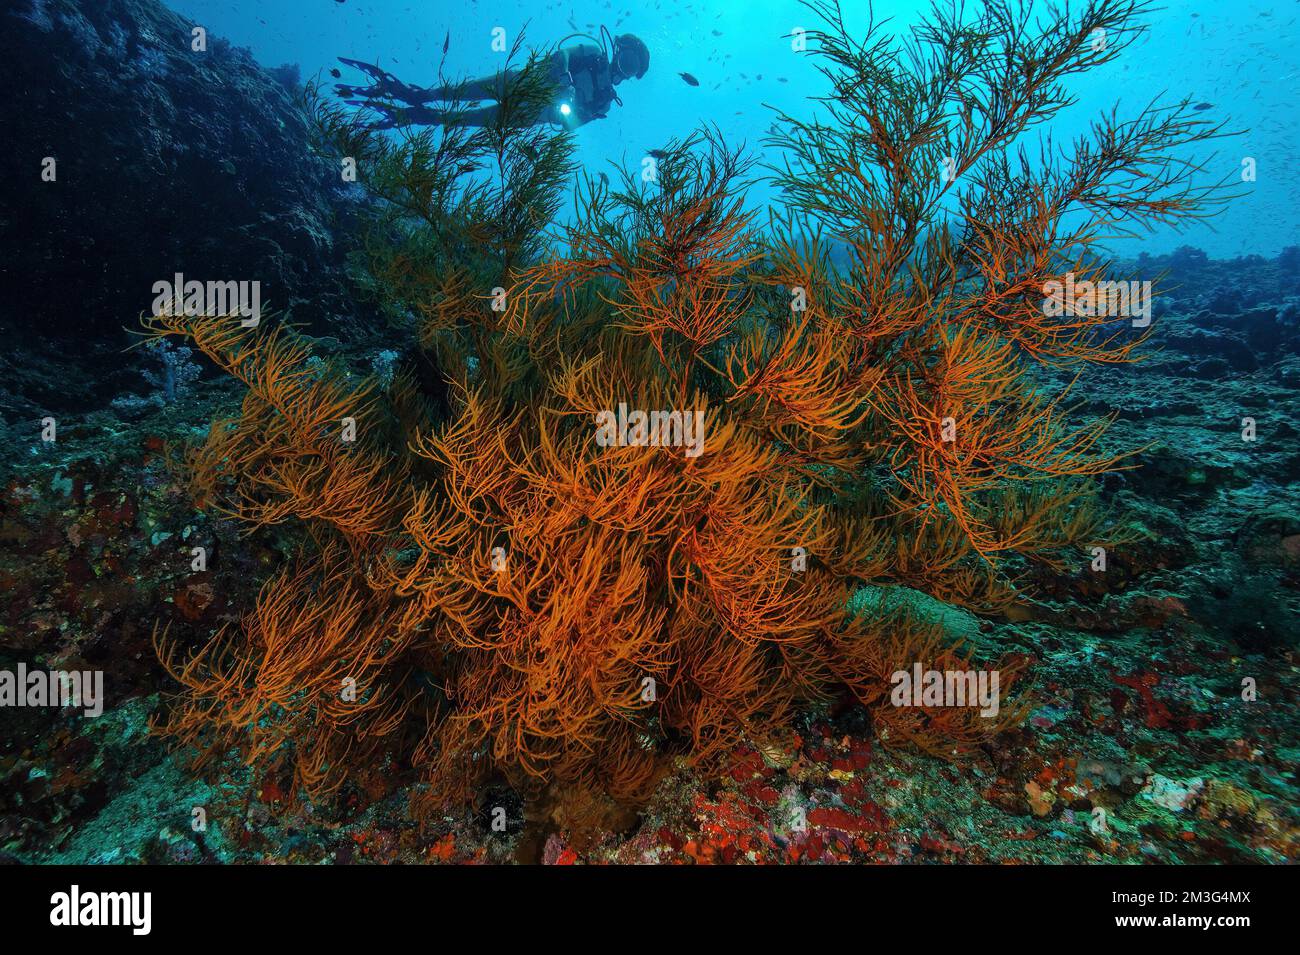 Black bushy black coral (Antipathes dichotoma), in the background silhouette of diver with underwater lamp, Indo-Pacific, dive site Hin Muang, Koh Stock Photo